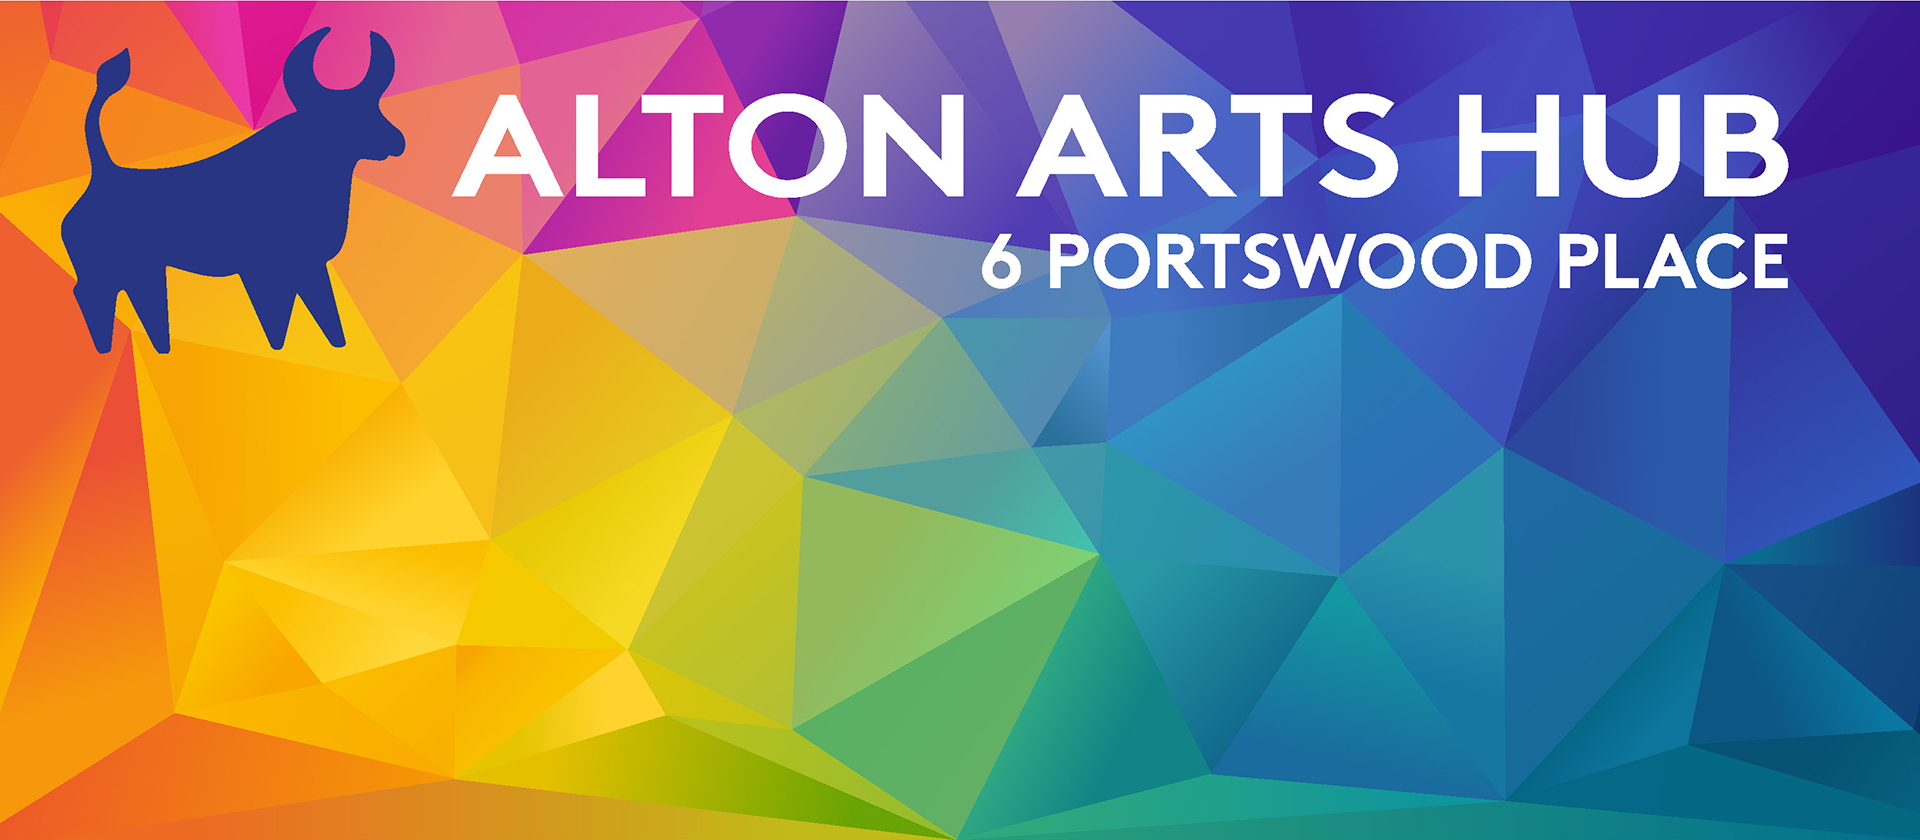 A poster advertising the relaunch of Alton Arts Hub